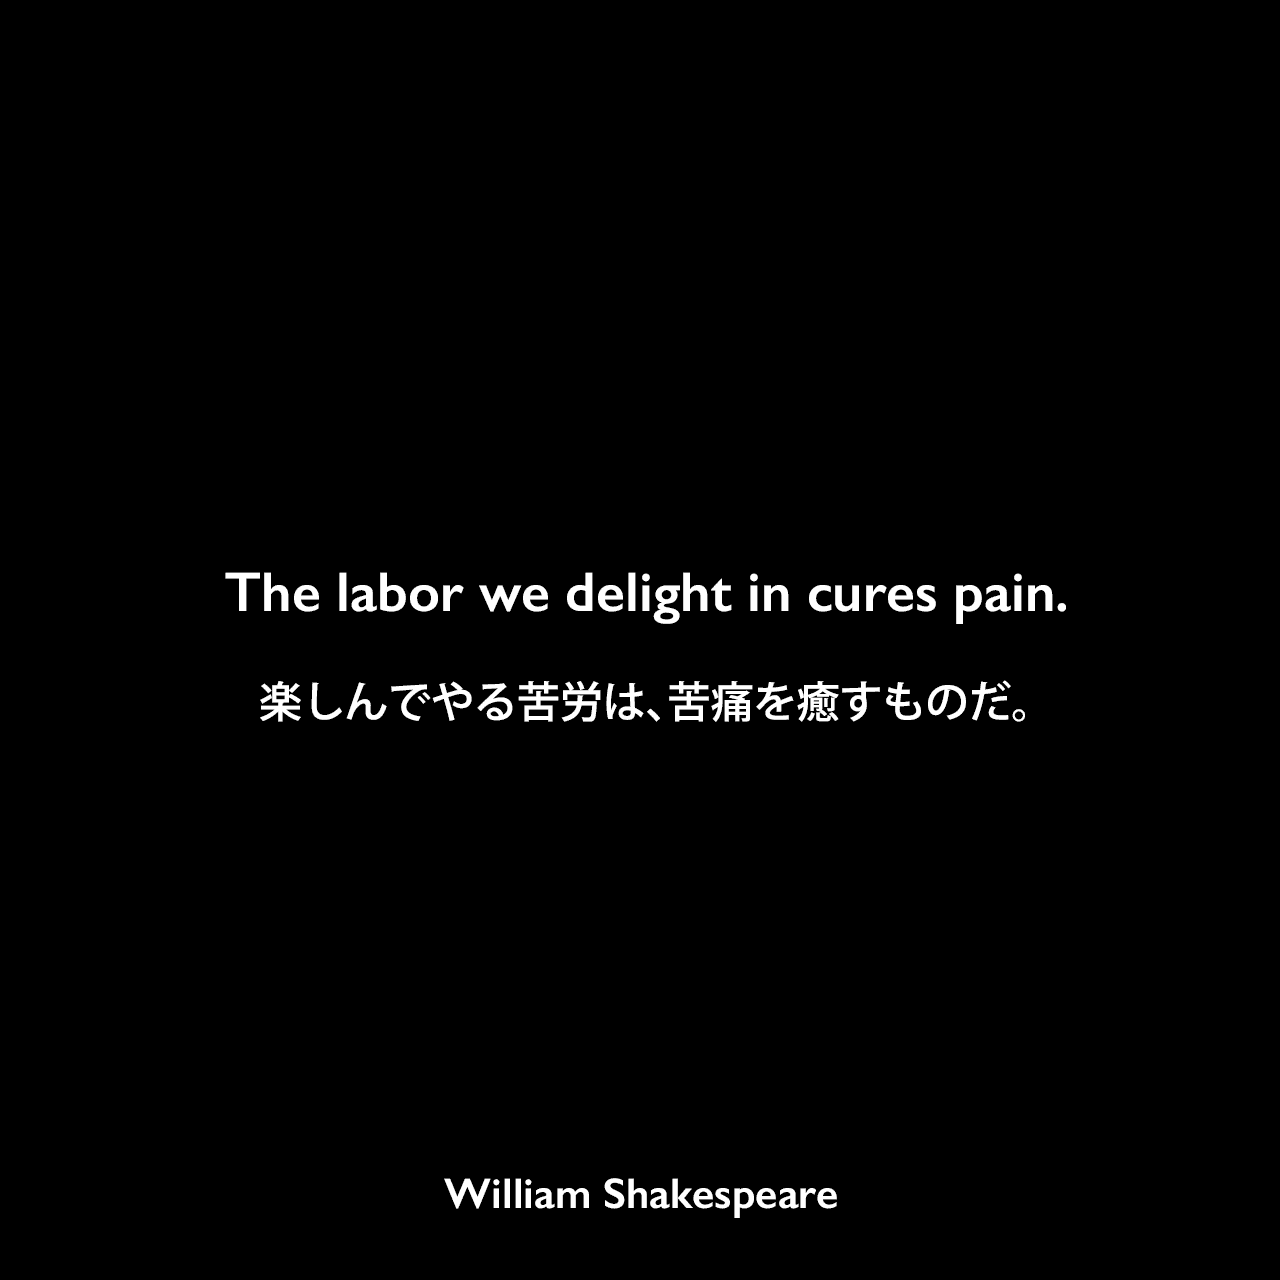 The labor we delight in cures pain.楽しんでやる苦労は、苦痛を癒すものだ。William Shakespeare